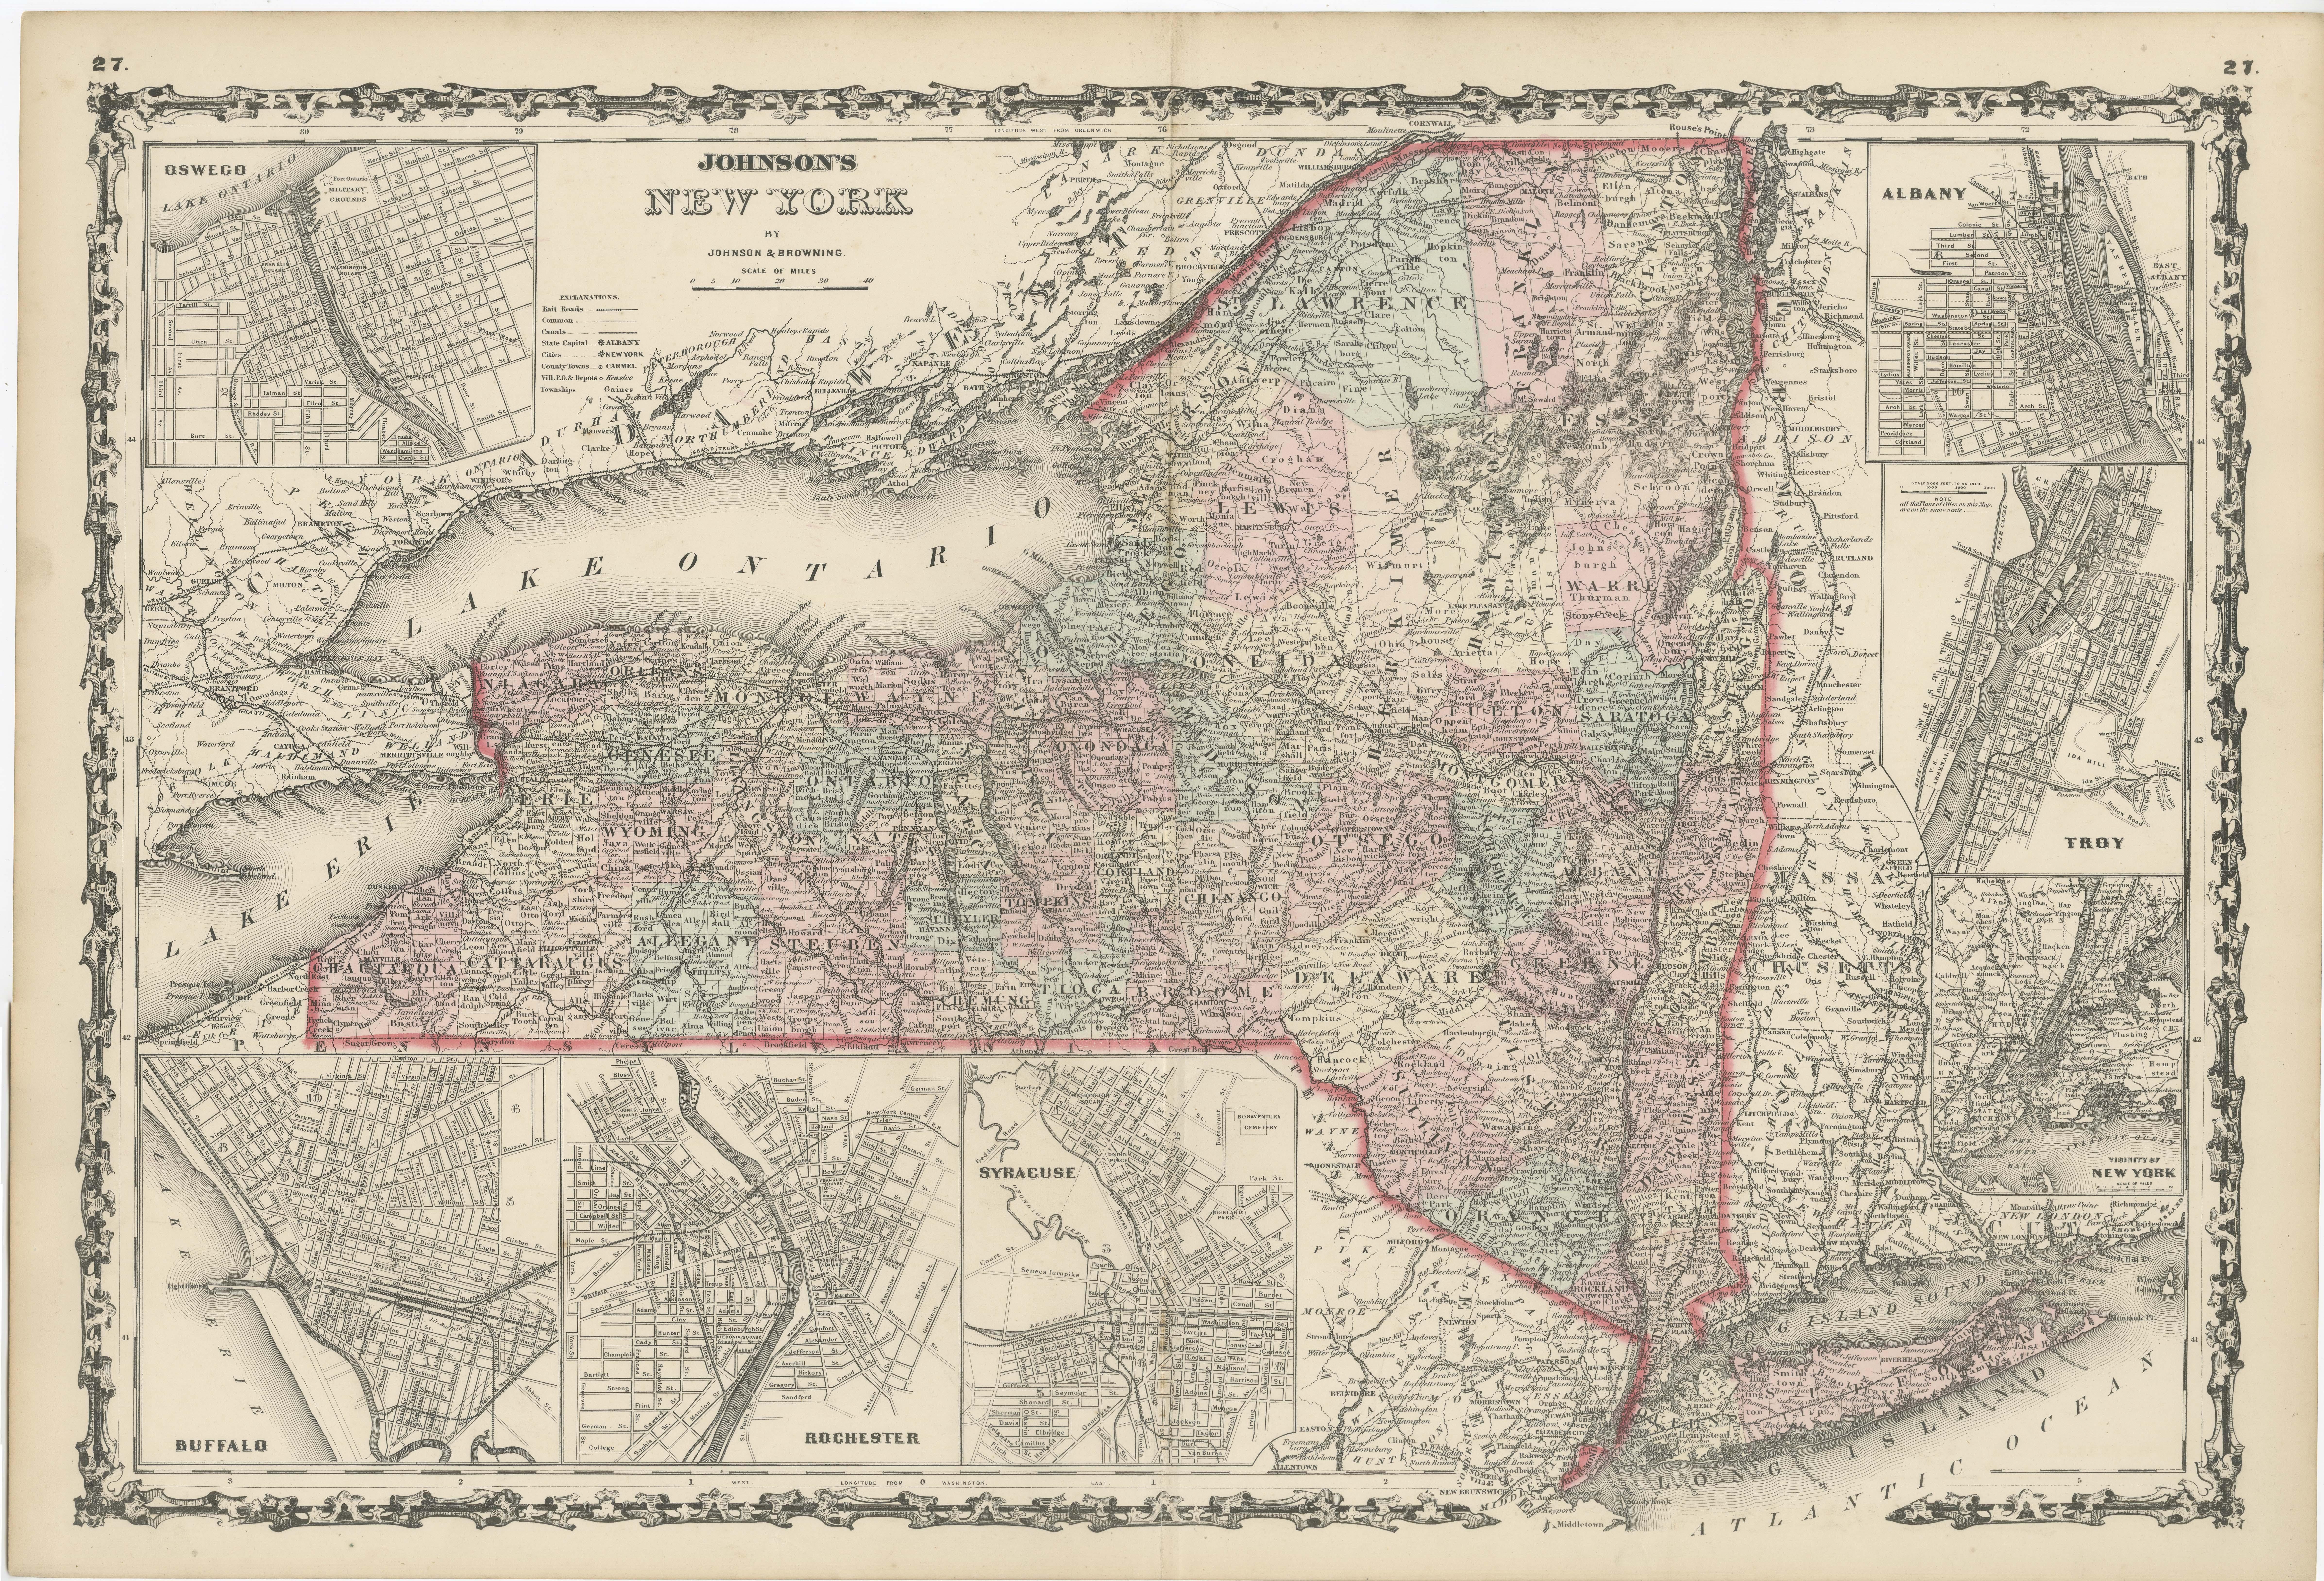 Antique map titled 'Johnson's New York' Large map of New York State. With insets of Albany, Oswego, Buffalo, Rochester, Syracuse, Troy and NYC. Published by Johnson and Browning, 1861.

The Johnson company was one of the better American mapmakers of